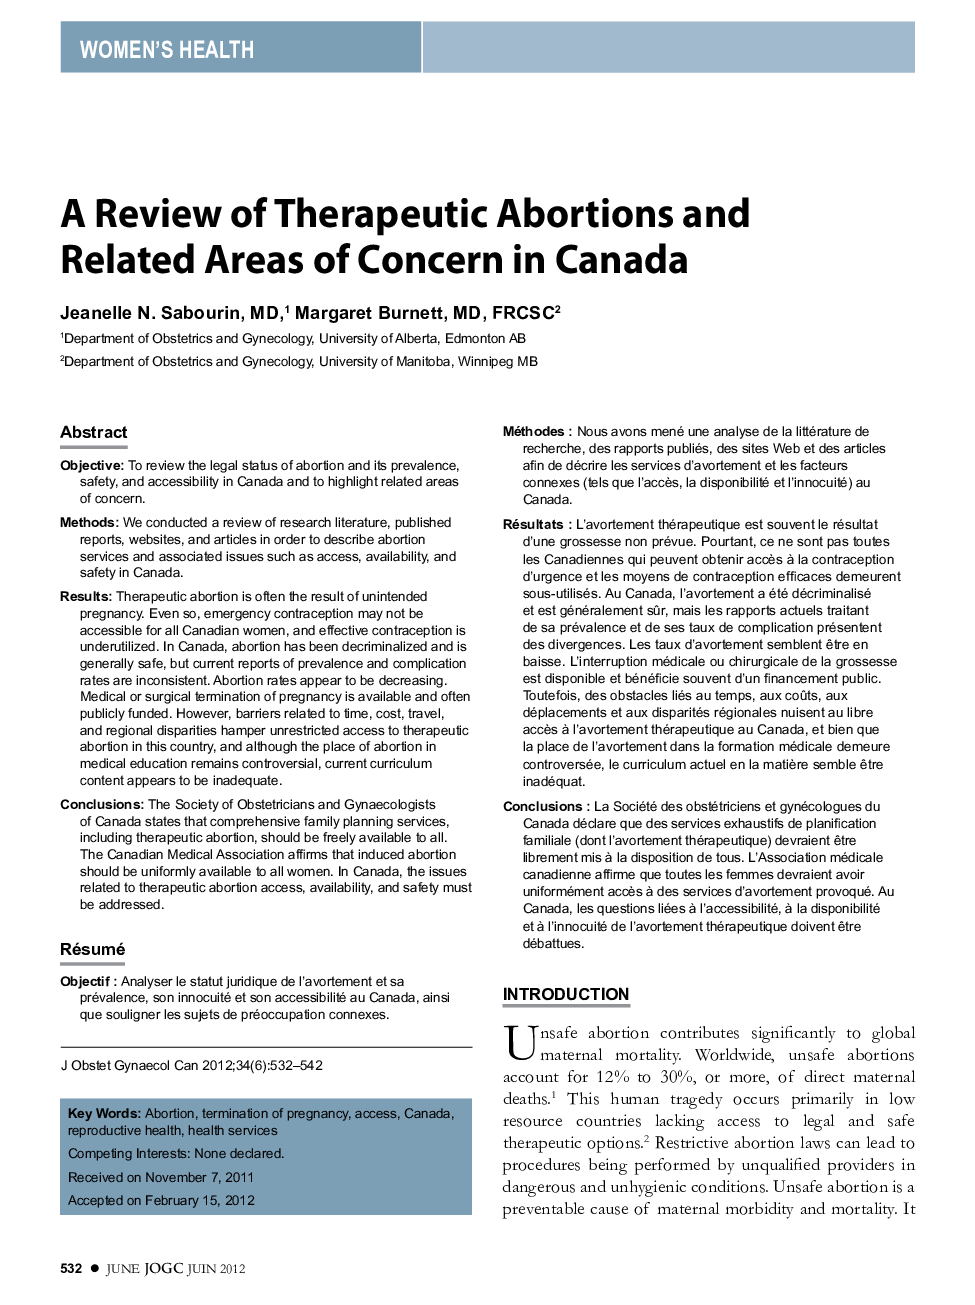 A Review of Therapeutic Abortions and Related Areas of Concern in Canada